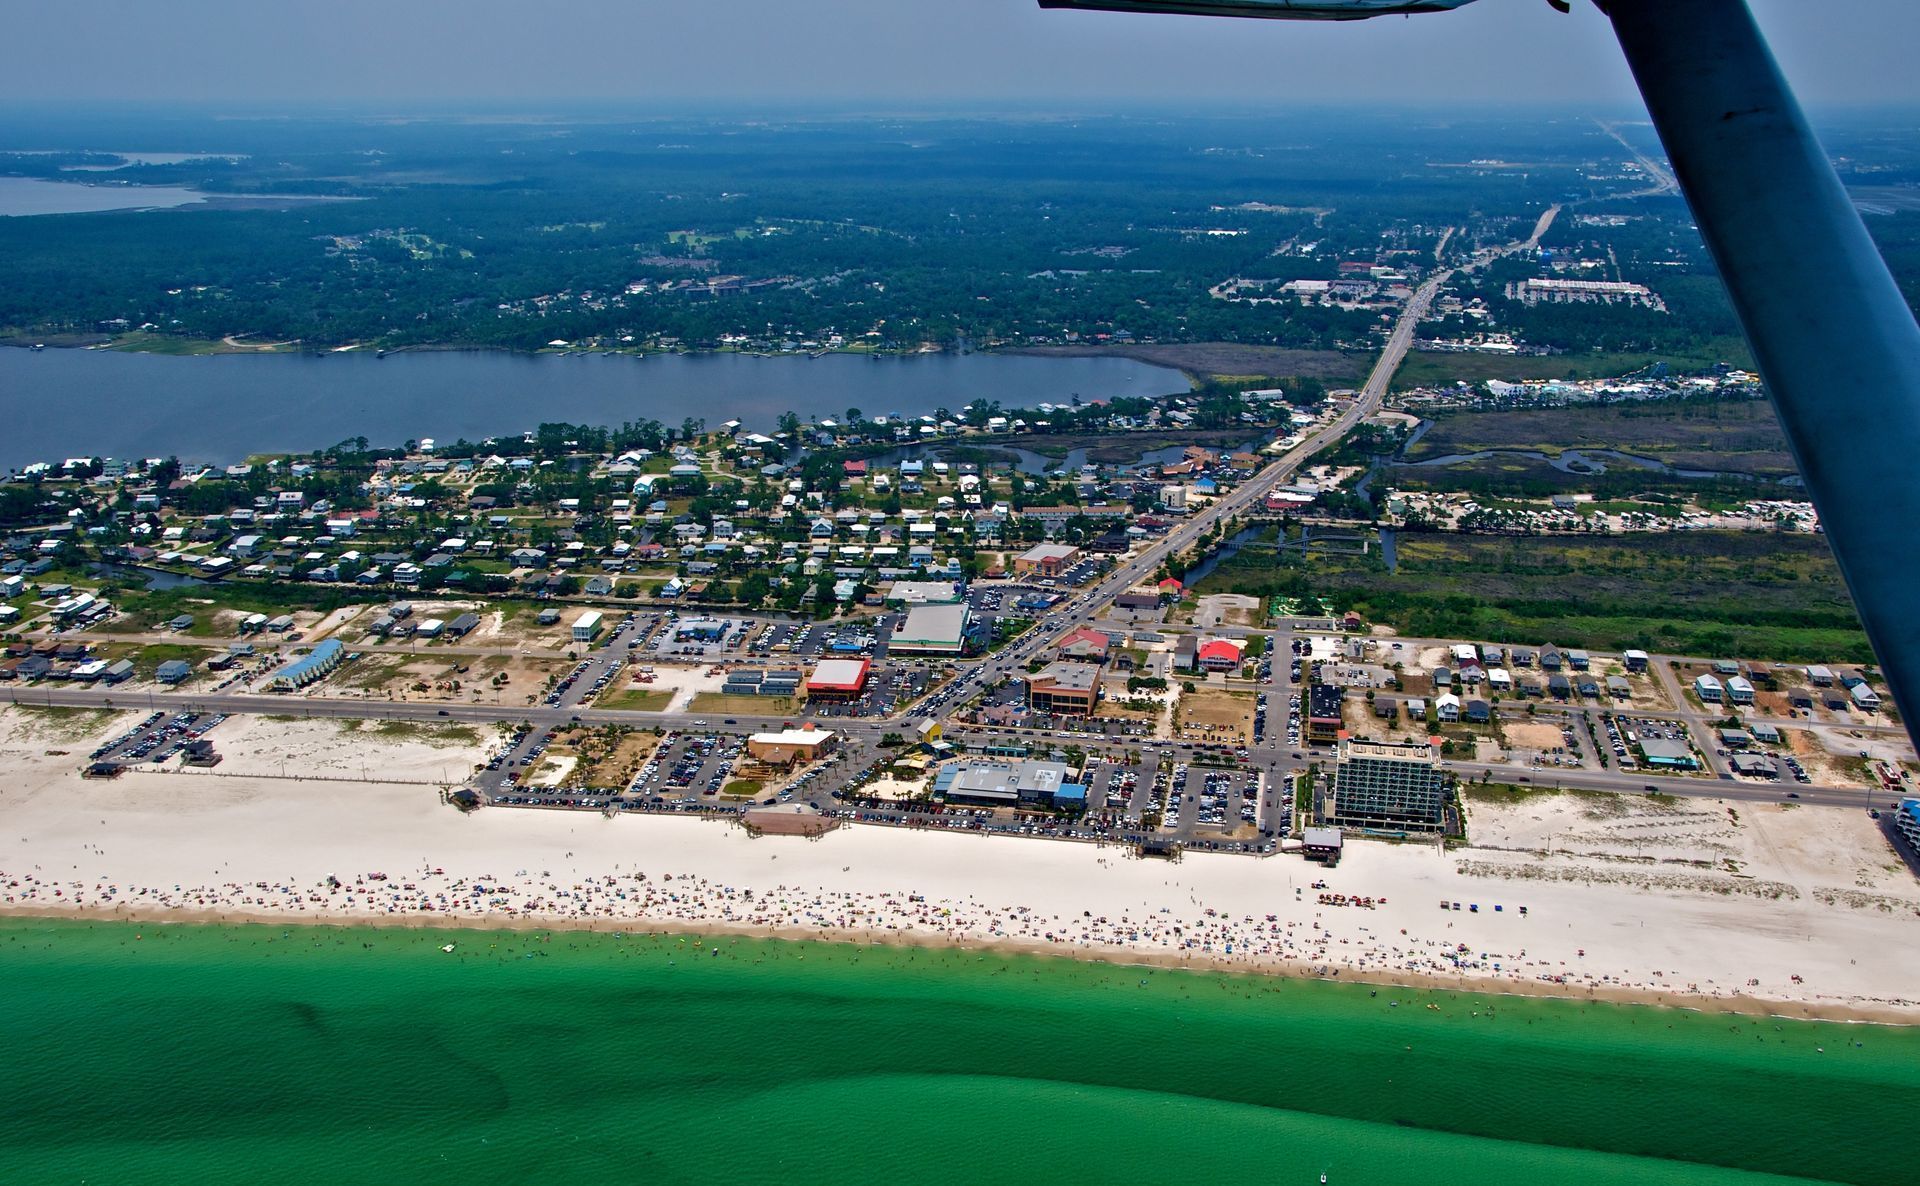 Gulf Shores Ranked 5th Best Beach in the U.S. by U.S. News